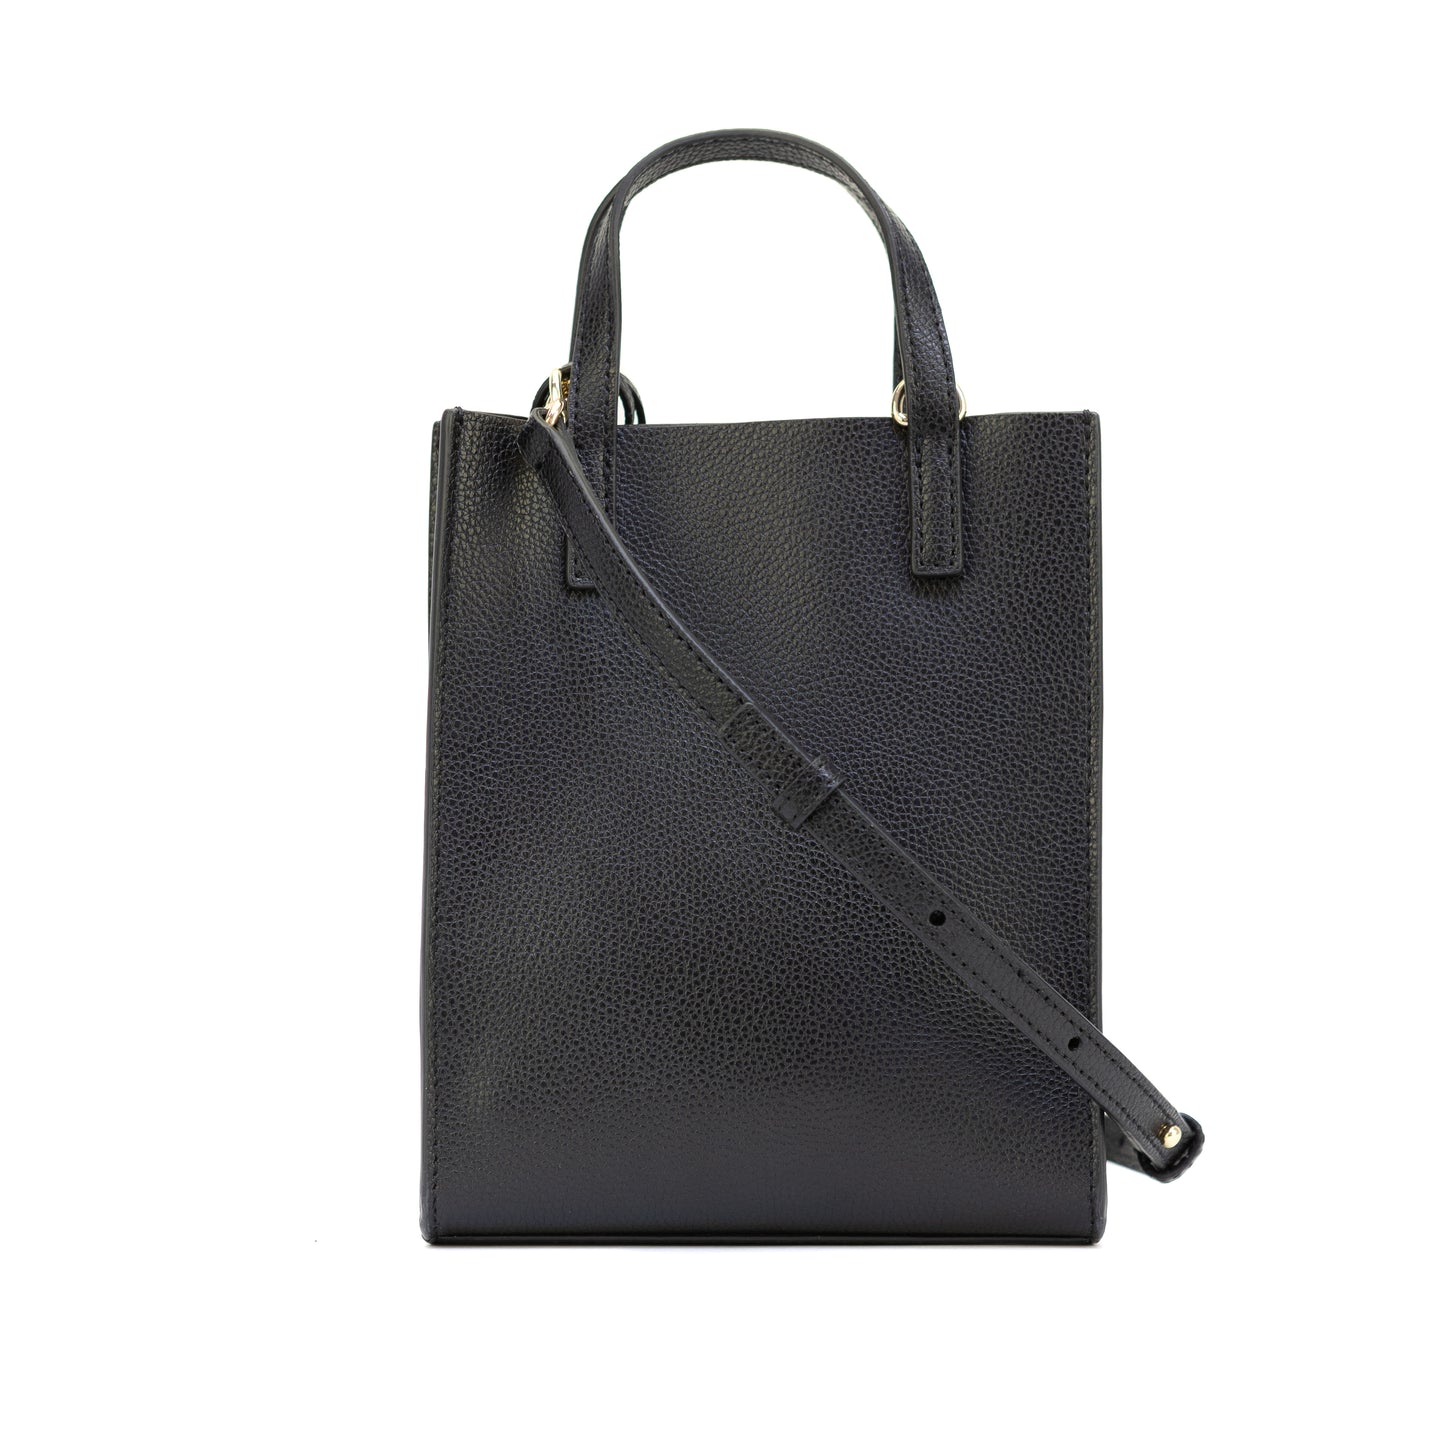 Marc Jacobs Women's Leather Micro Tote - Black